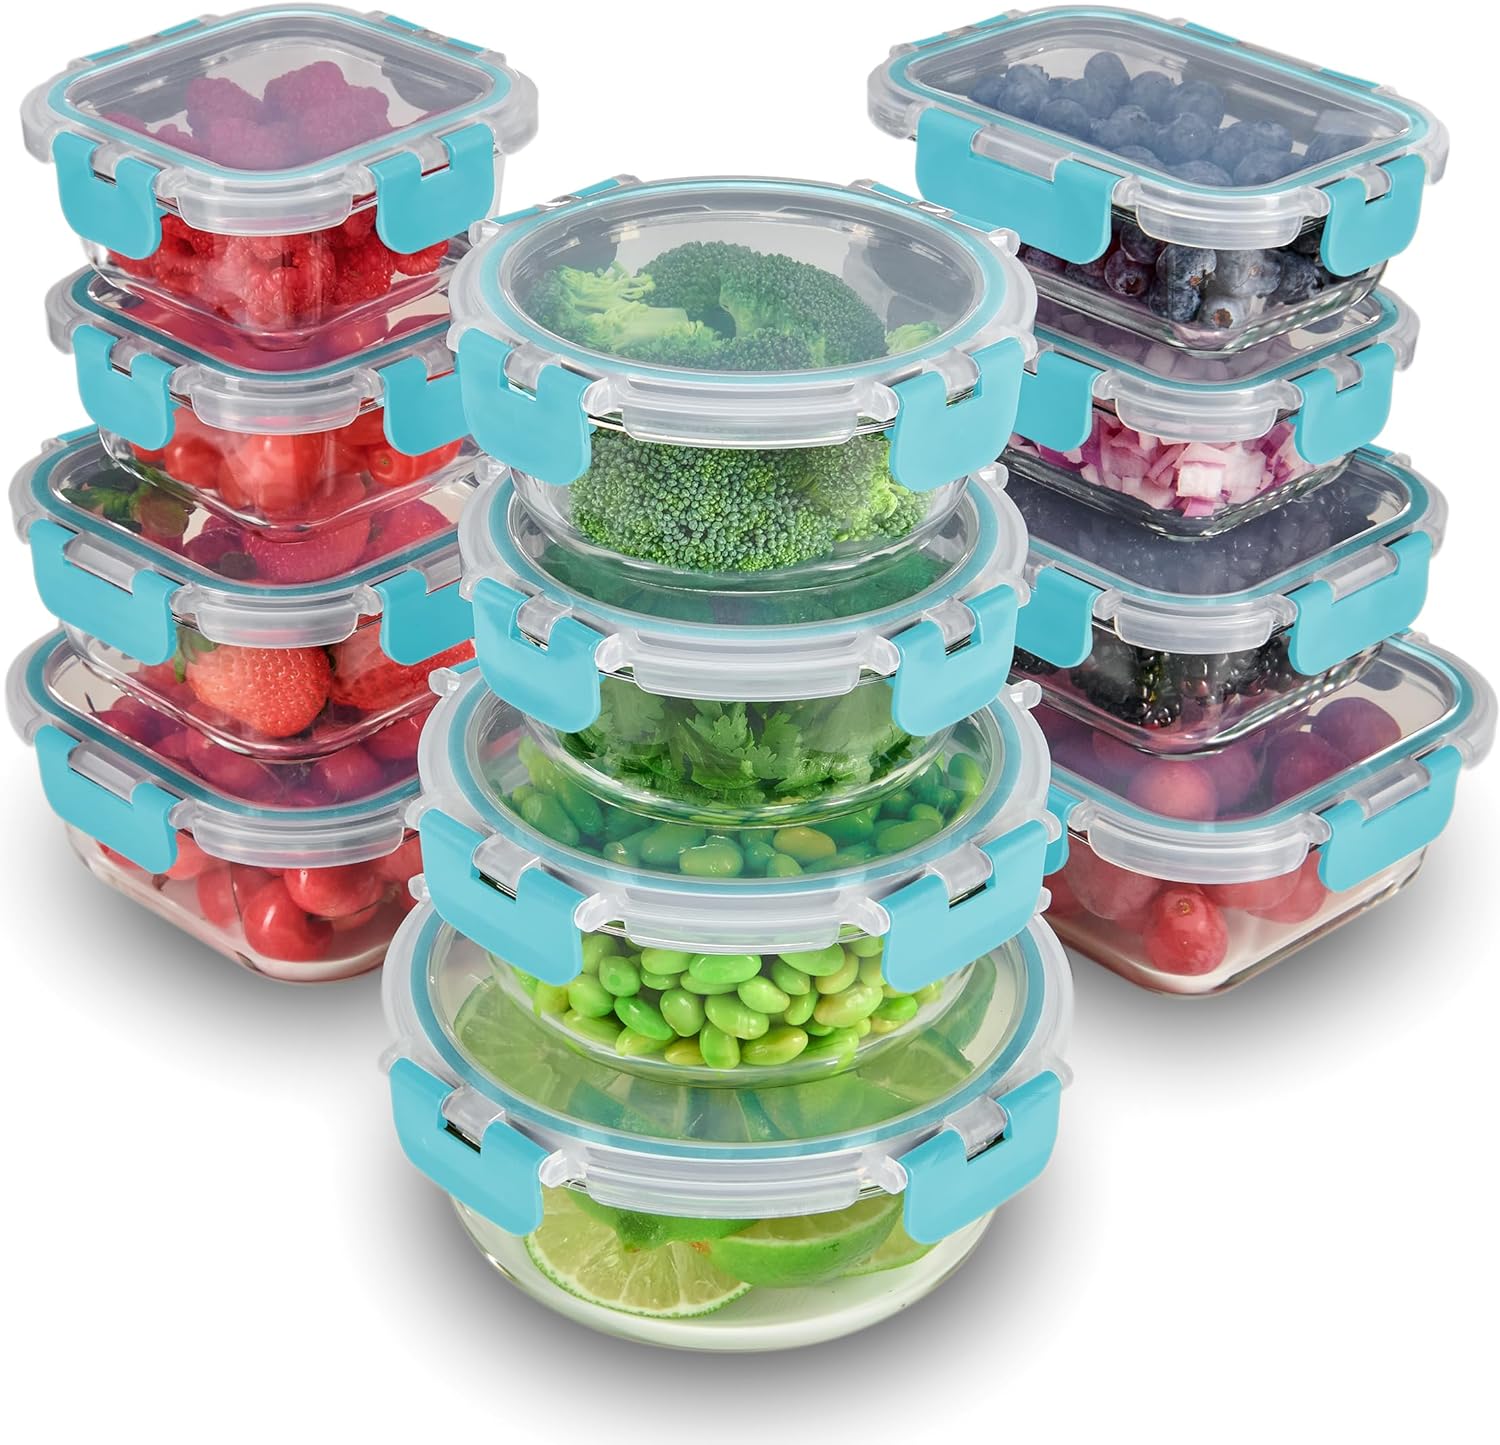 FineDine 24 Piece Glass Storage Containers with Lids - Leak Proof, Dishwasher Safe Glass Food Storage Containers for Meal Prep or Leftovers, Teal